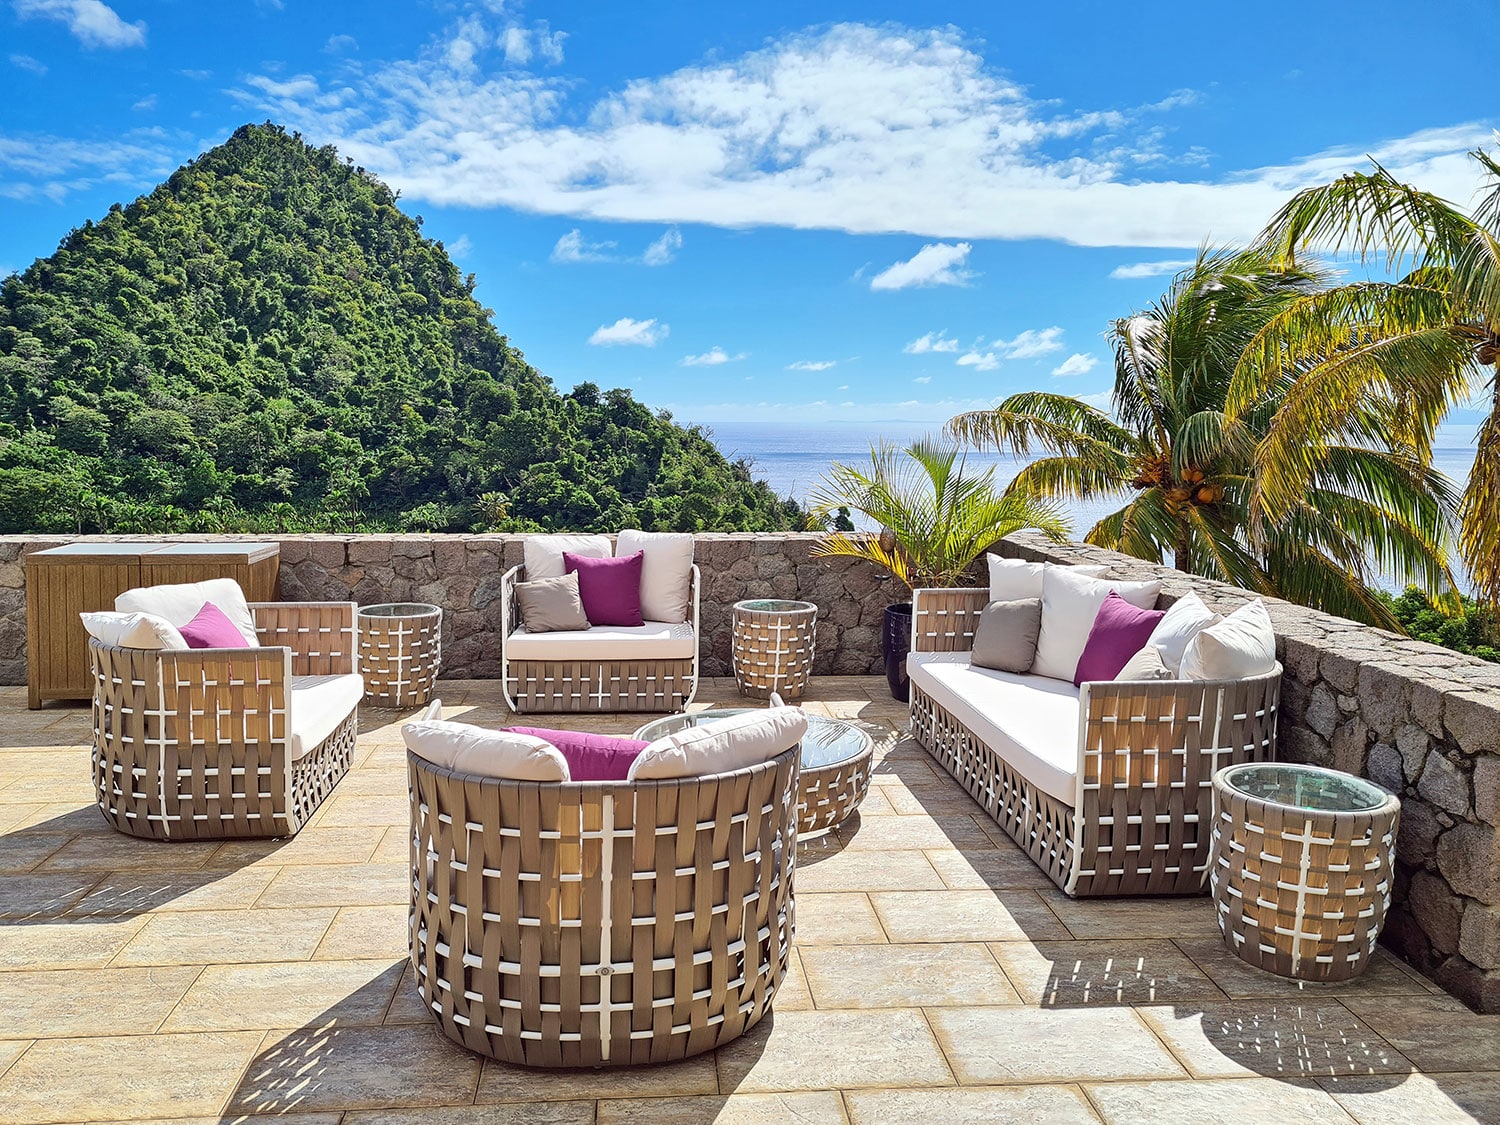 The view from one of the terraces at Coulibri Ridge on the Caribbean island of Dominica.